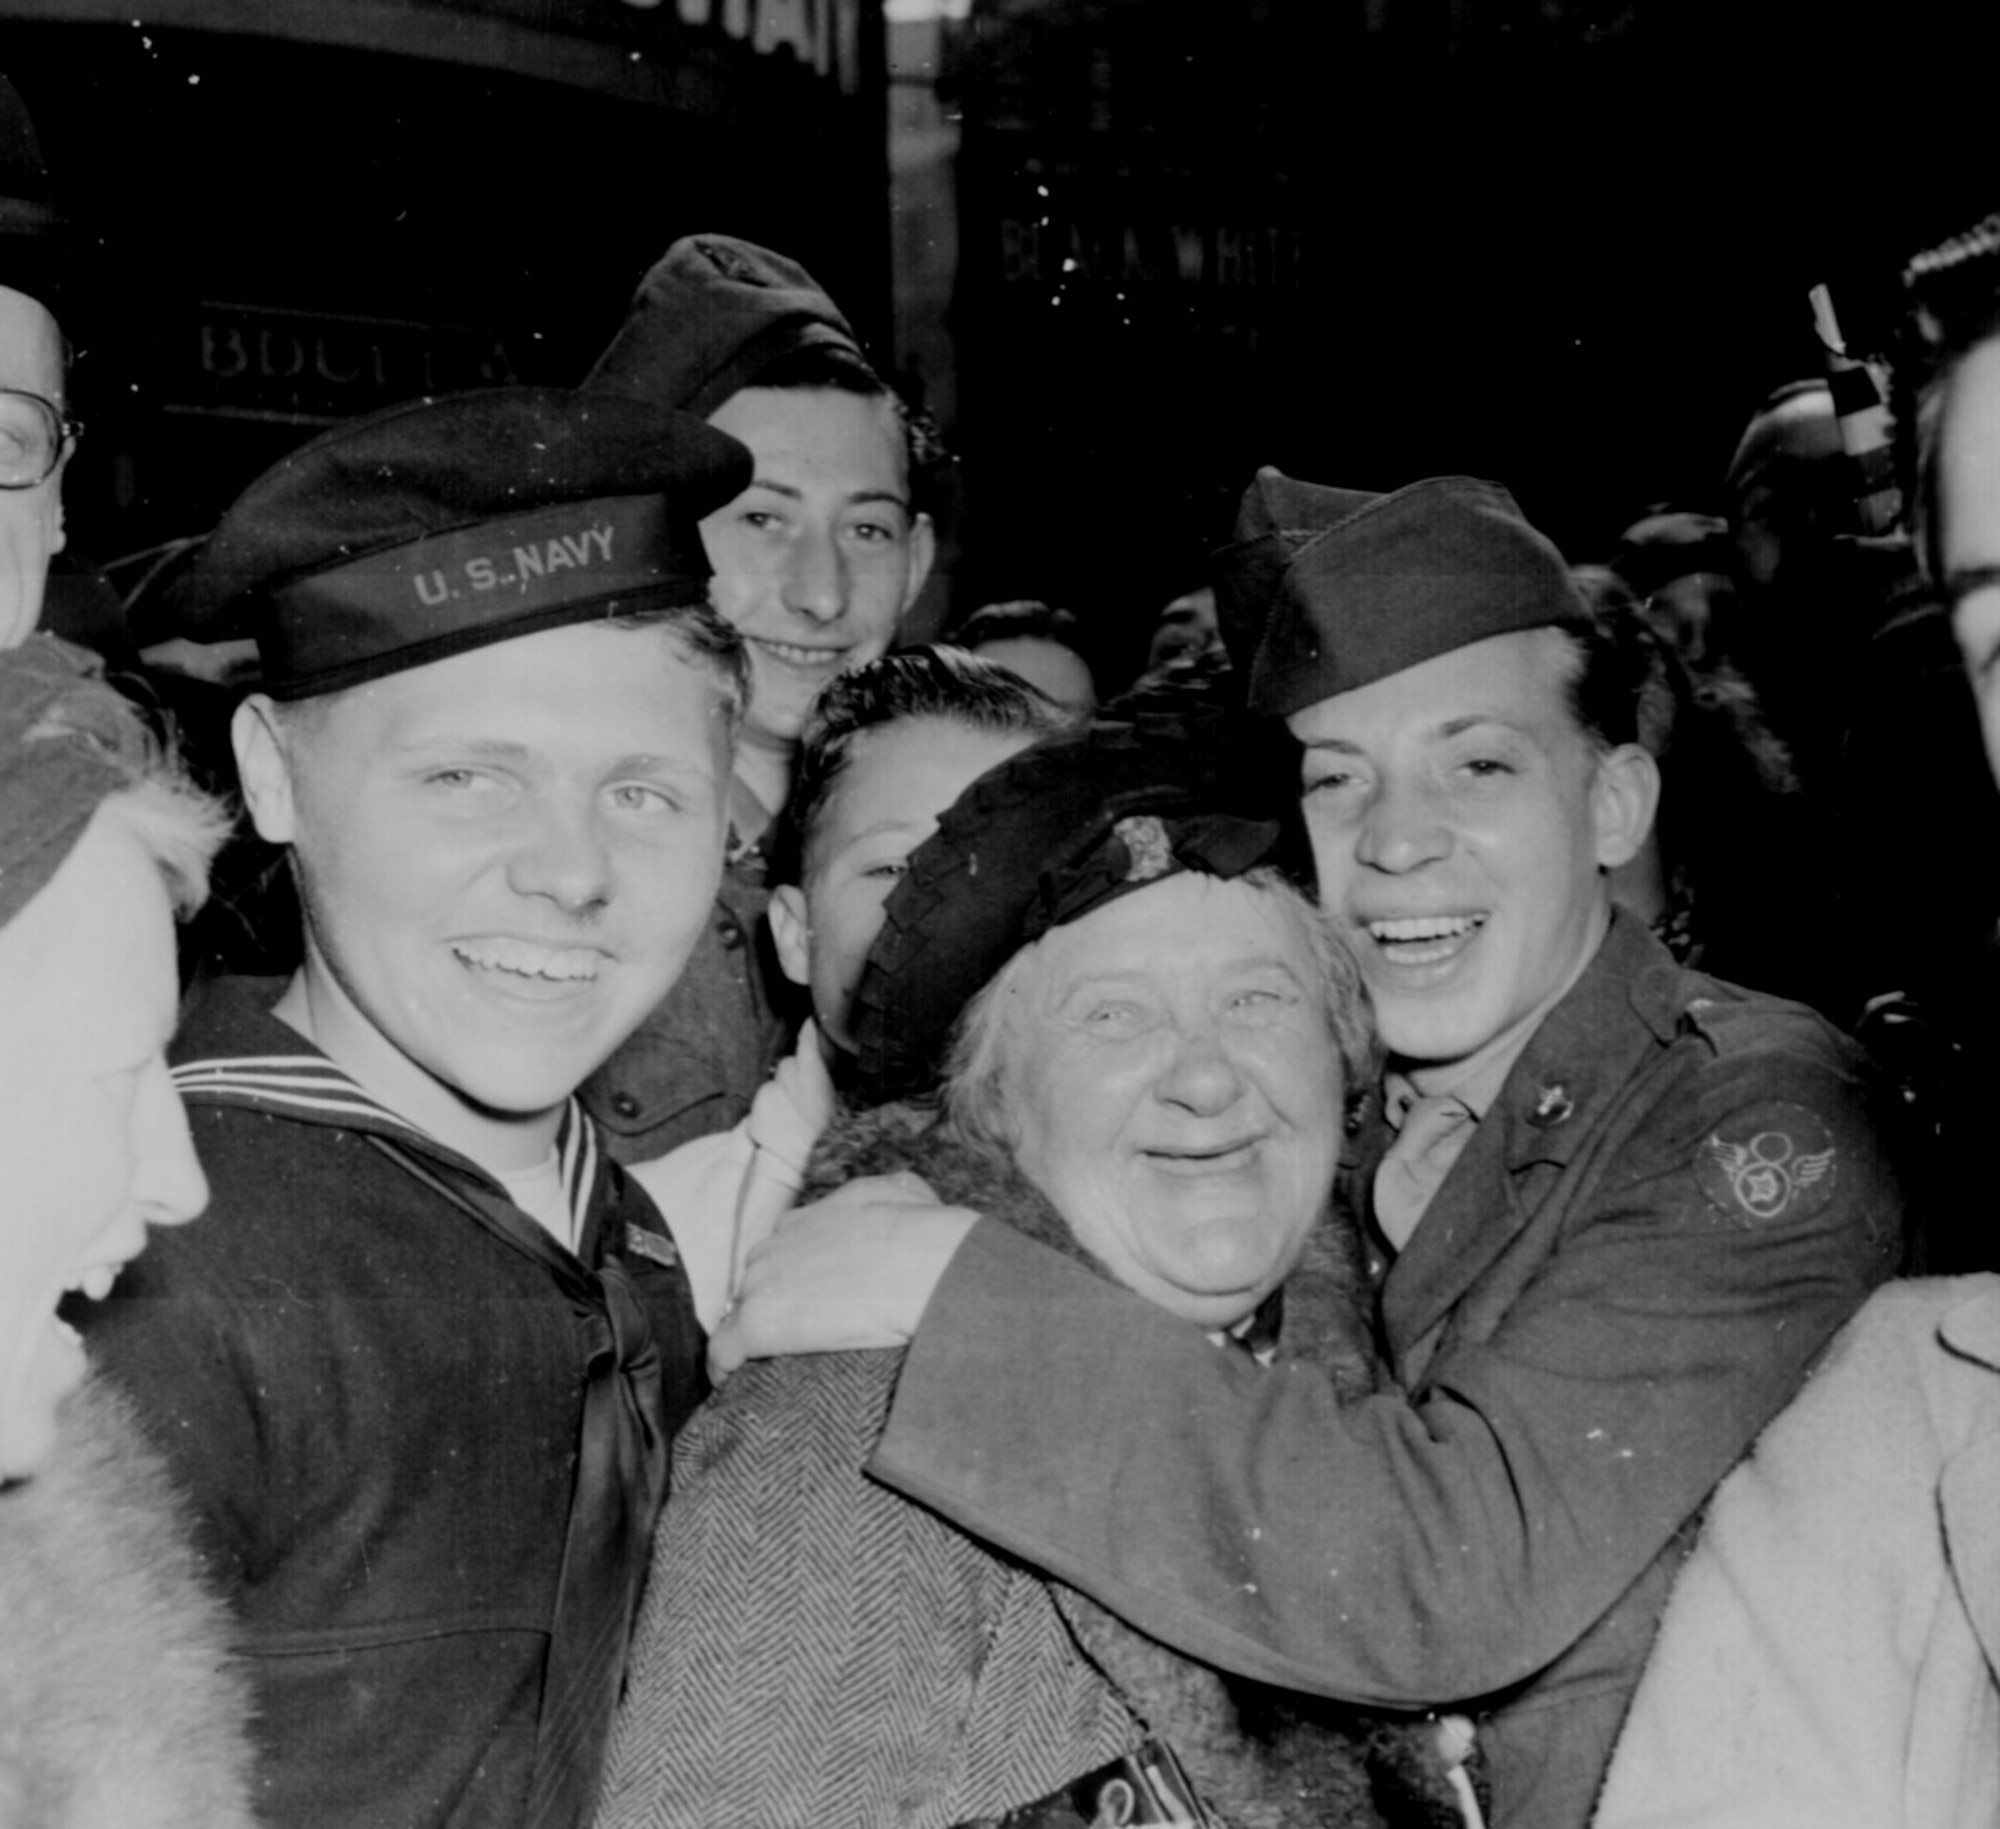 American service members and British citizens celebrate Germany’s unconditional surrender, May 7, 1945 at Piccadilly Circus, London.